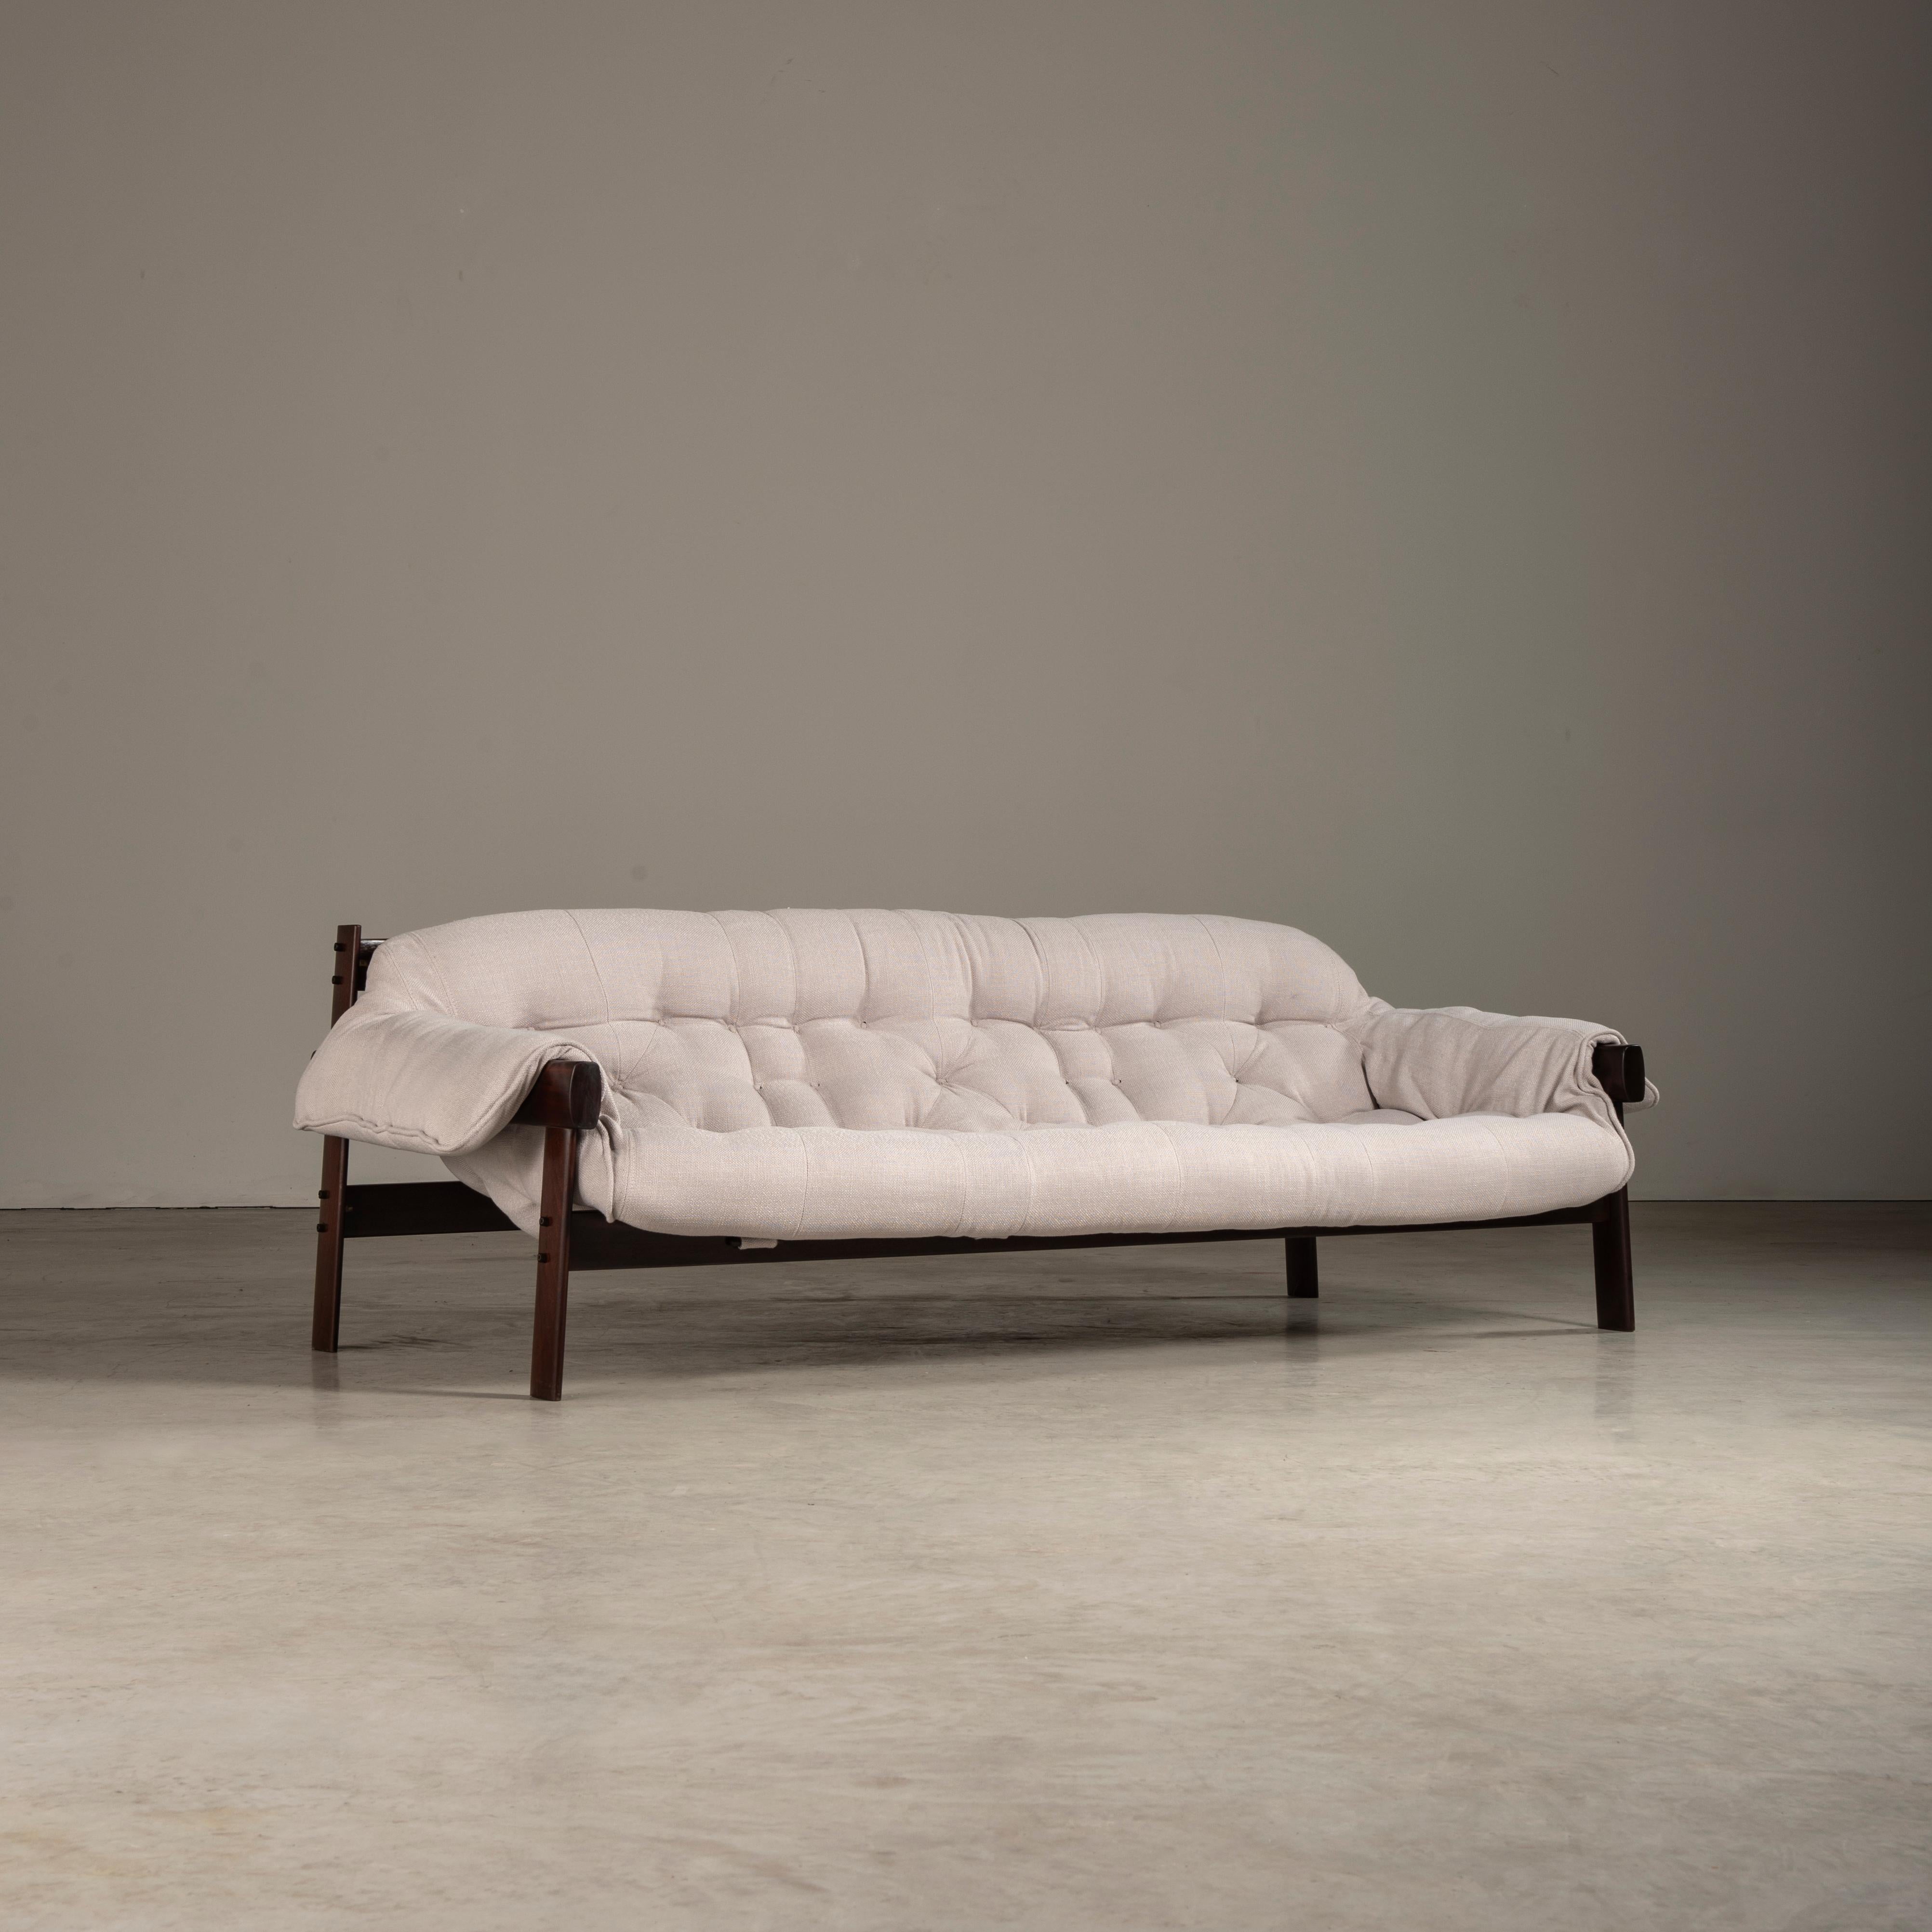 The MP-41 sofa, a quintessential piece by the renowned designer Percival Lafer, is a masterstroke of Brazilian mid-century design. Lafer, widely celebrated for his innovative and distinctive style, has once again manifested his genius in this